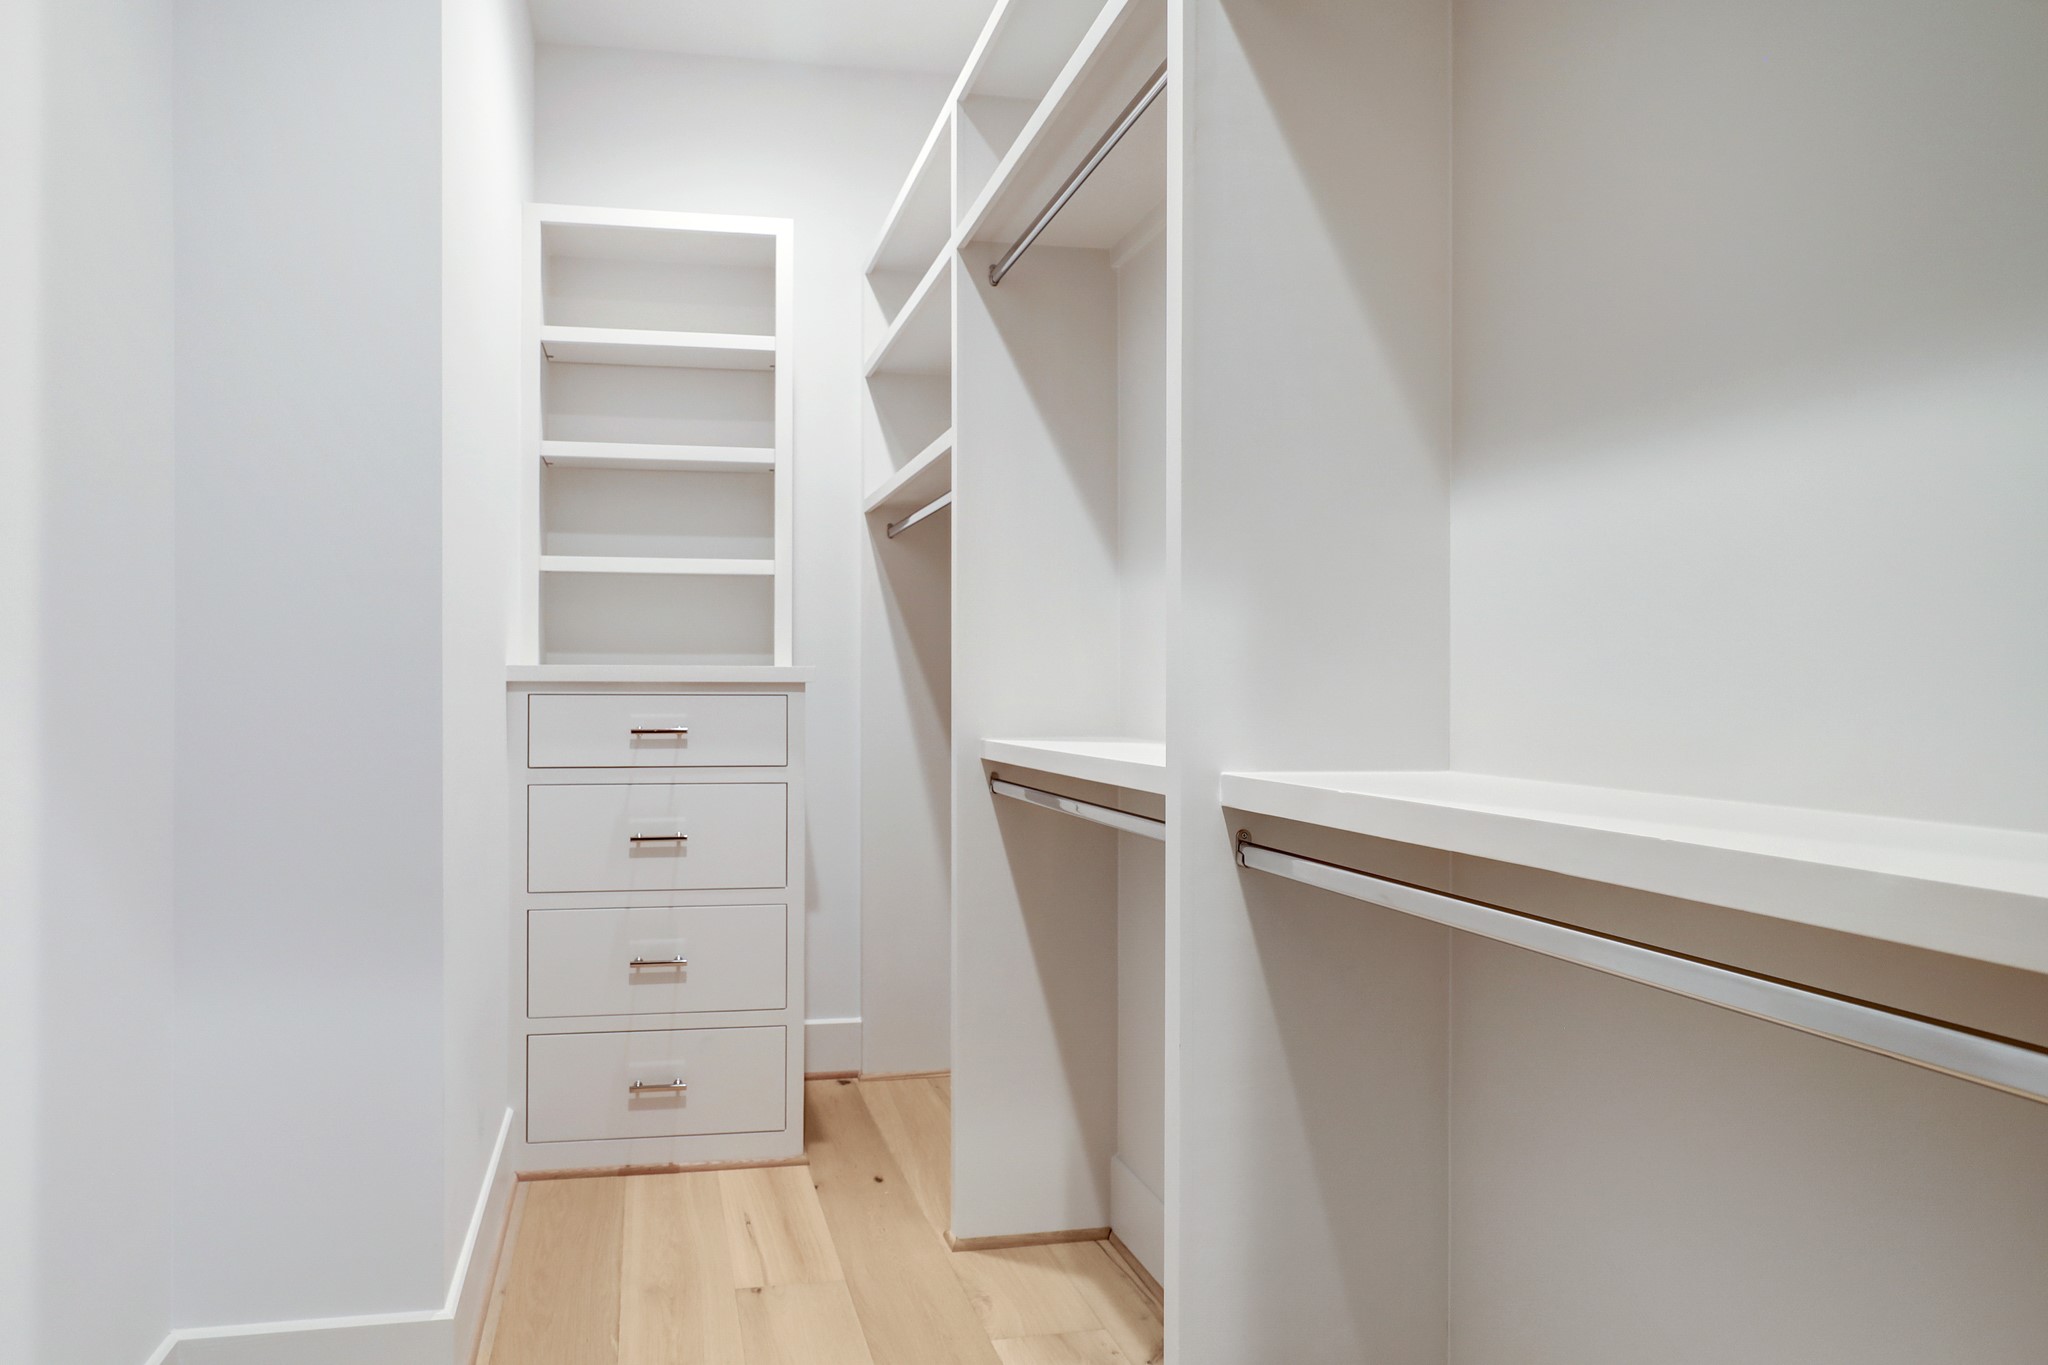 The secondary closets all have built in drawers and shelves and both long and short hanging